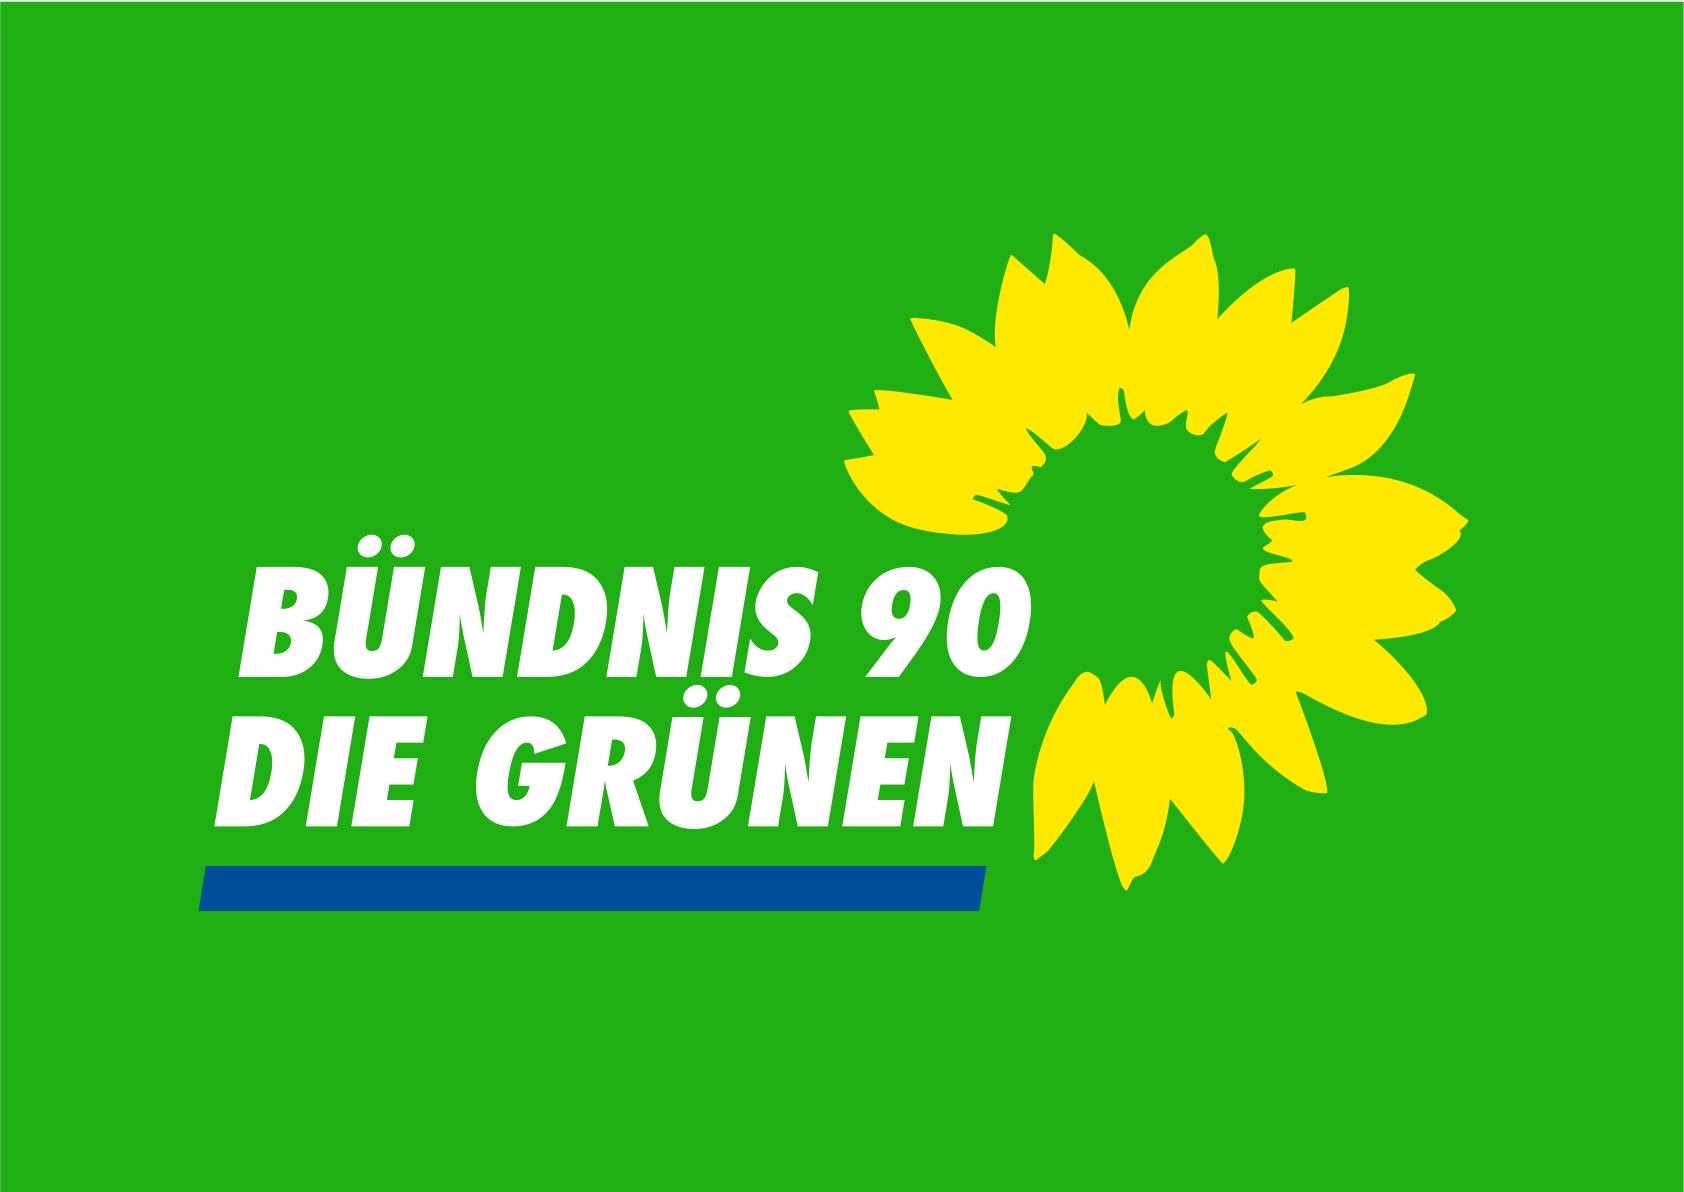 logo of the German Green party, reading Bündnis 90 die Grünen with a green background and yellow sunflower